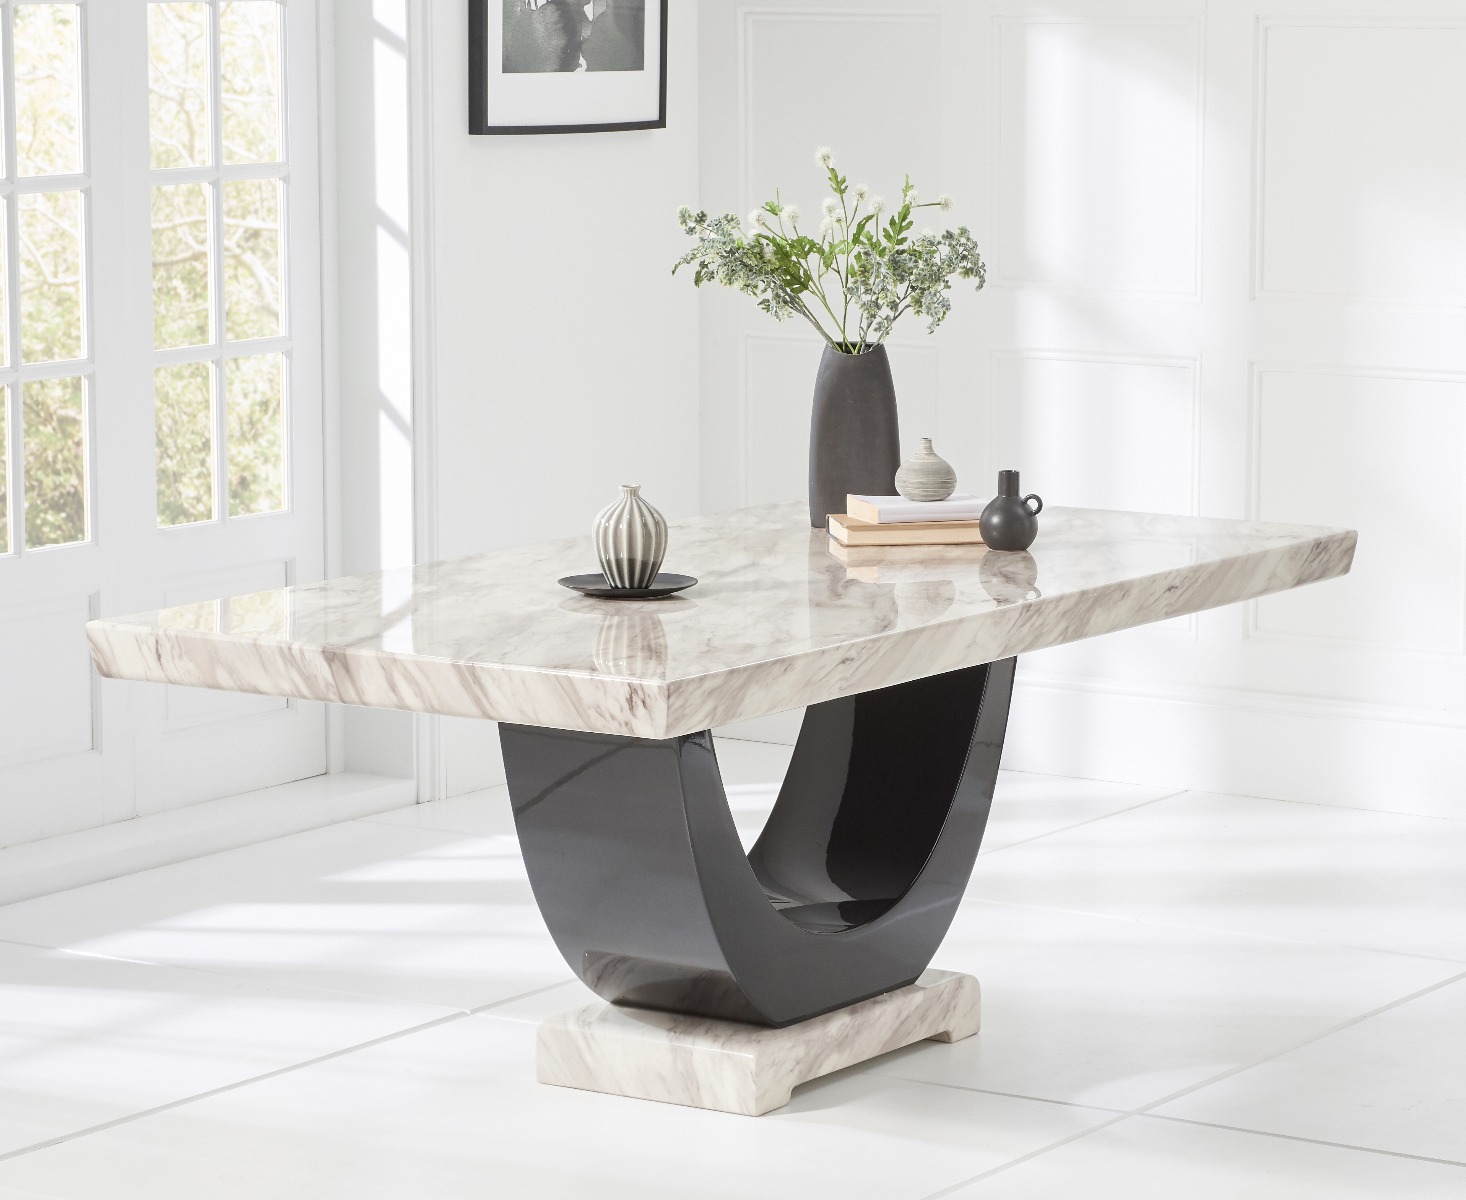 Photo 2 of Raphael 200cm cream and black pedestal marble dining table with 12 grey sophia chairs